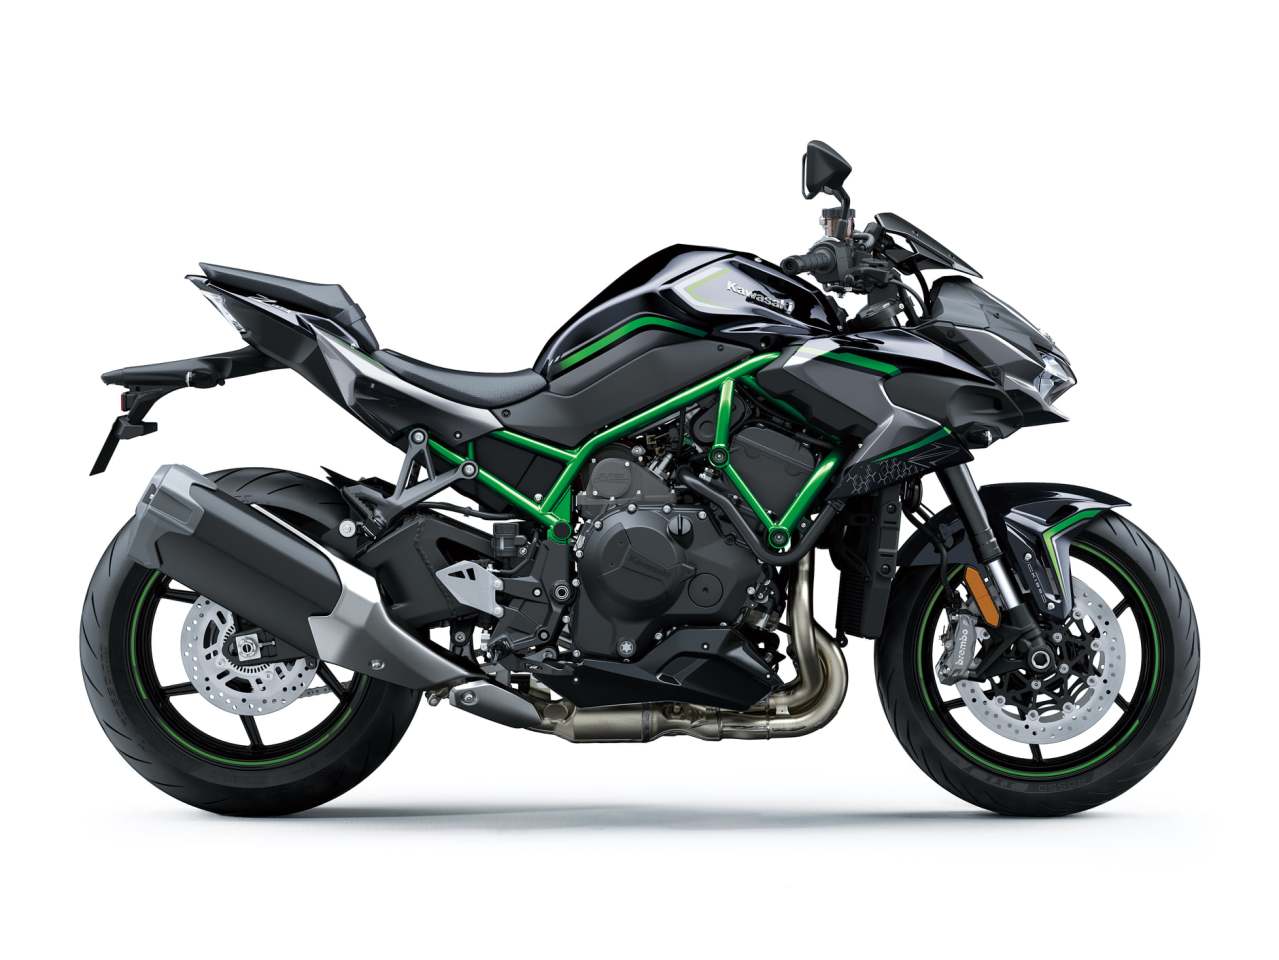 OK freaks, here's your naked, supercharged Kawasaki Z H2